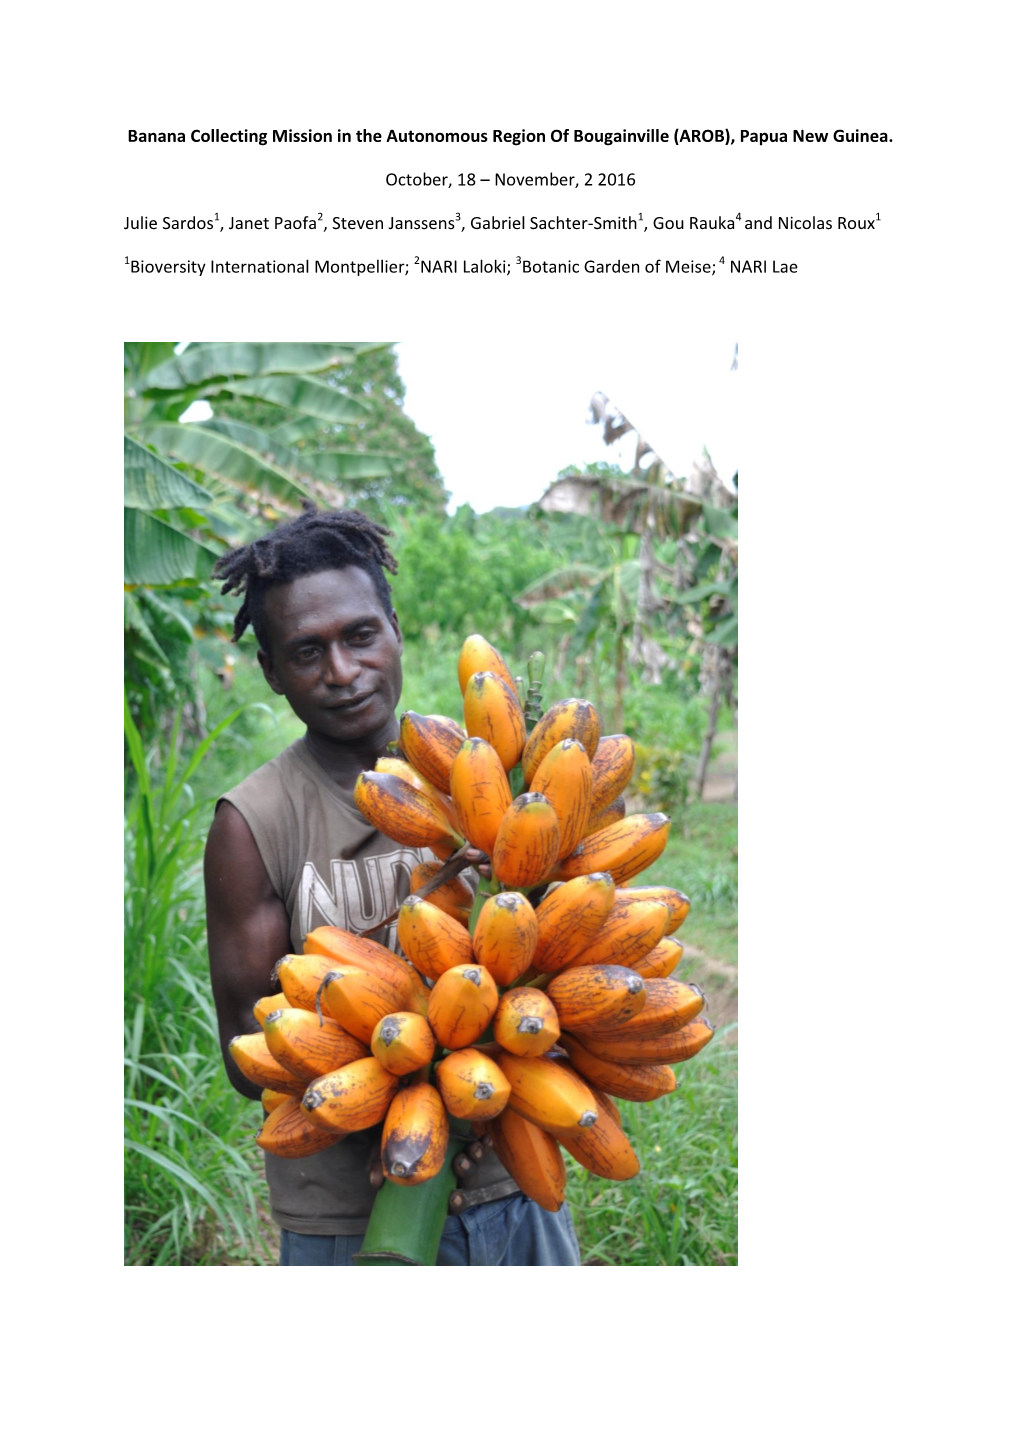 Banana Collecting Mission in the Autonomous Region of Bougainville (AROB), Papua New Guinea